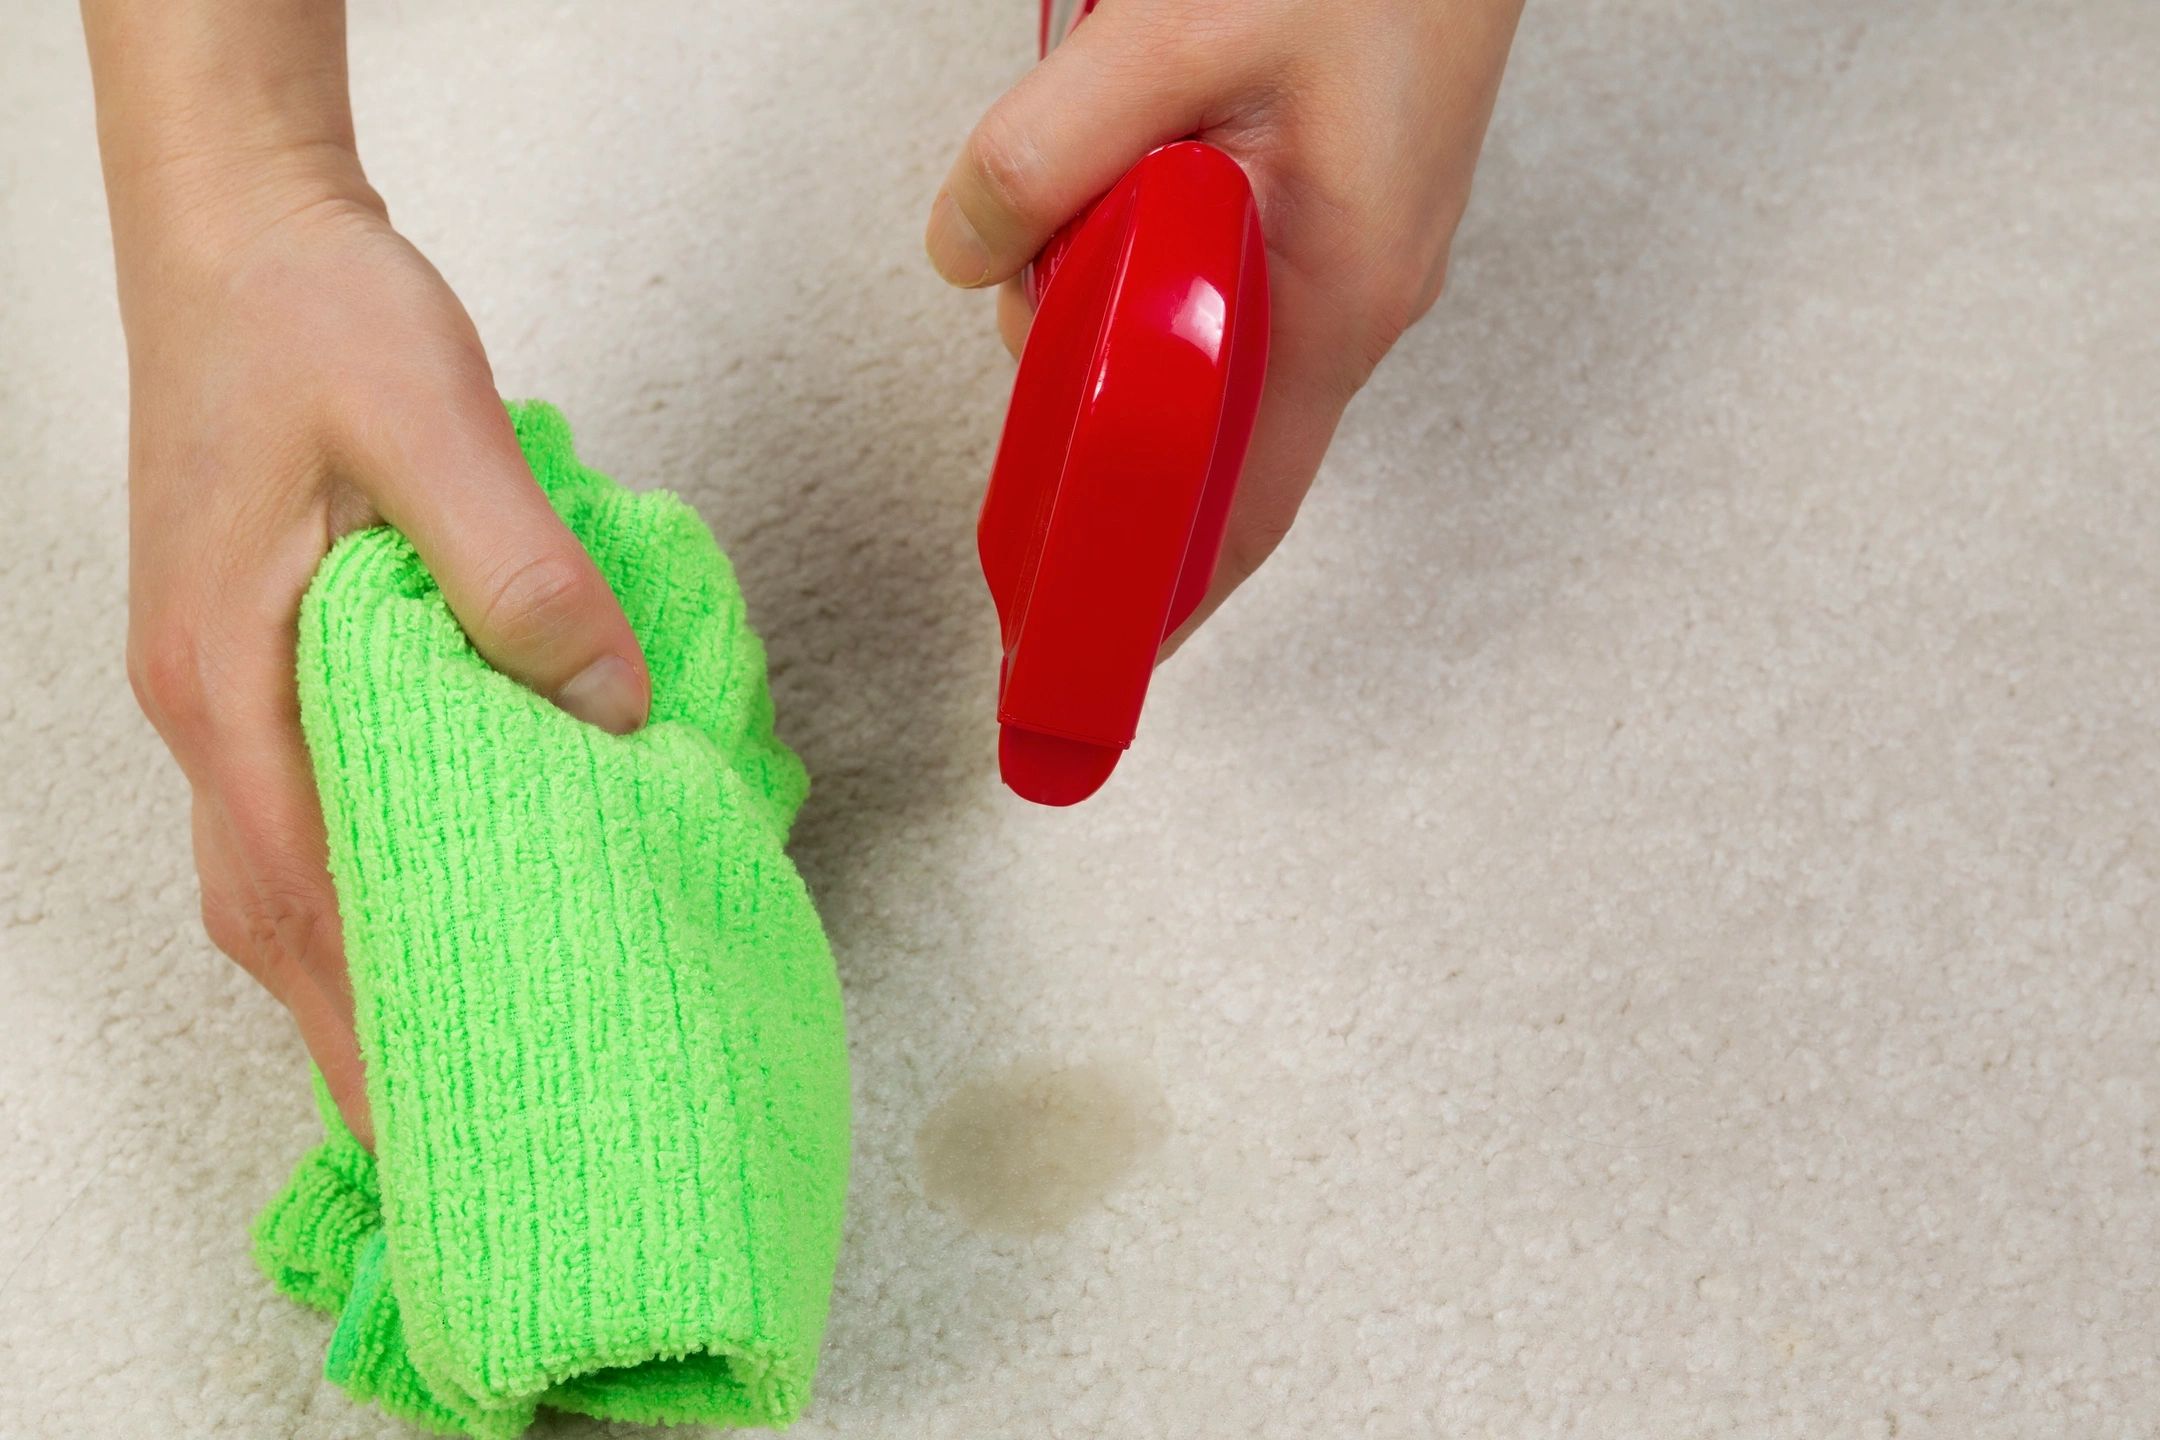 Carpet Stain Removal Guide: 10 Stains You Can DYI